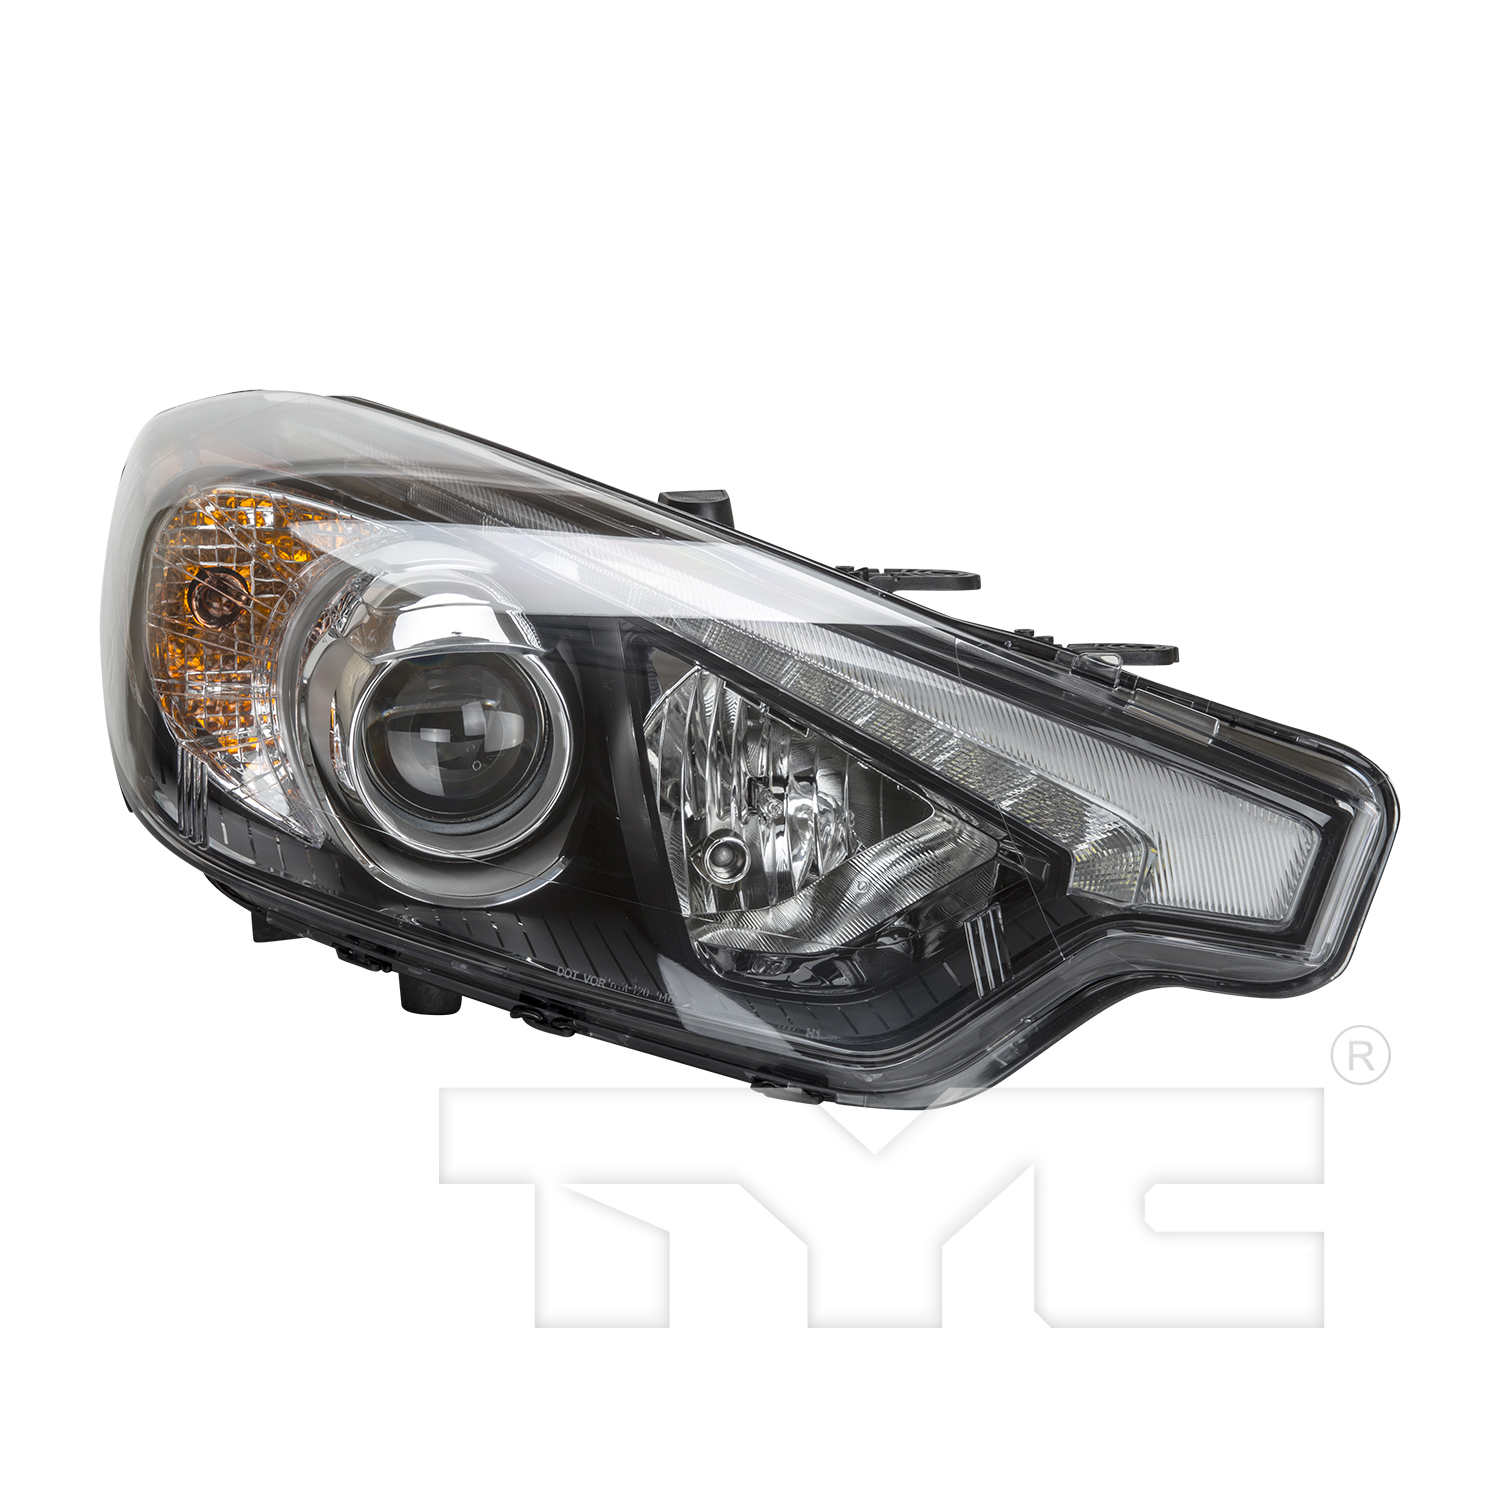 Aftermarket HEADLIGHTS for KIA - FORTE, FORTE,14-15,RT Headlamp assy composite